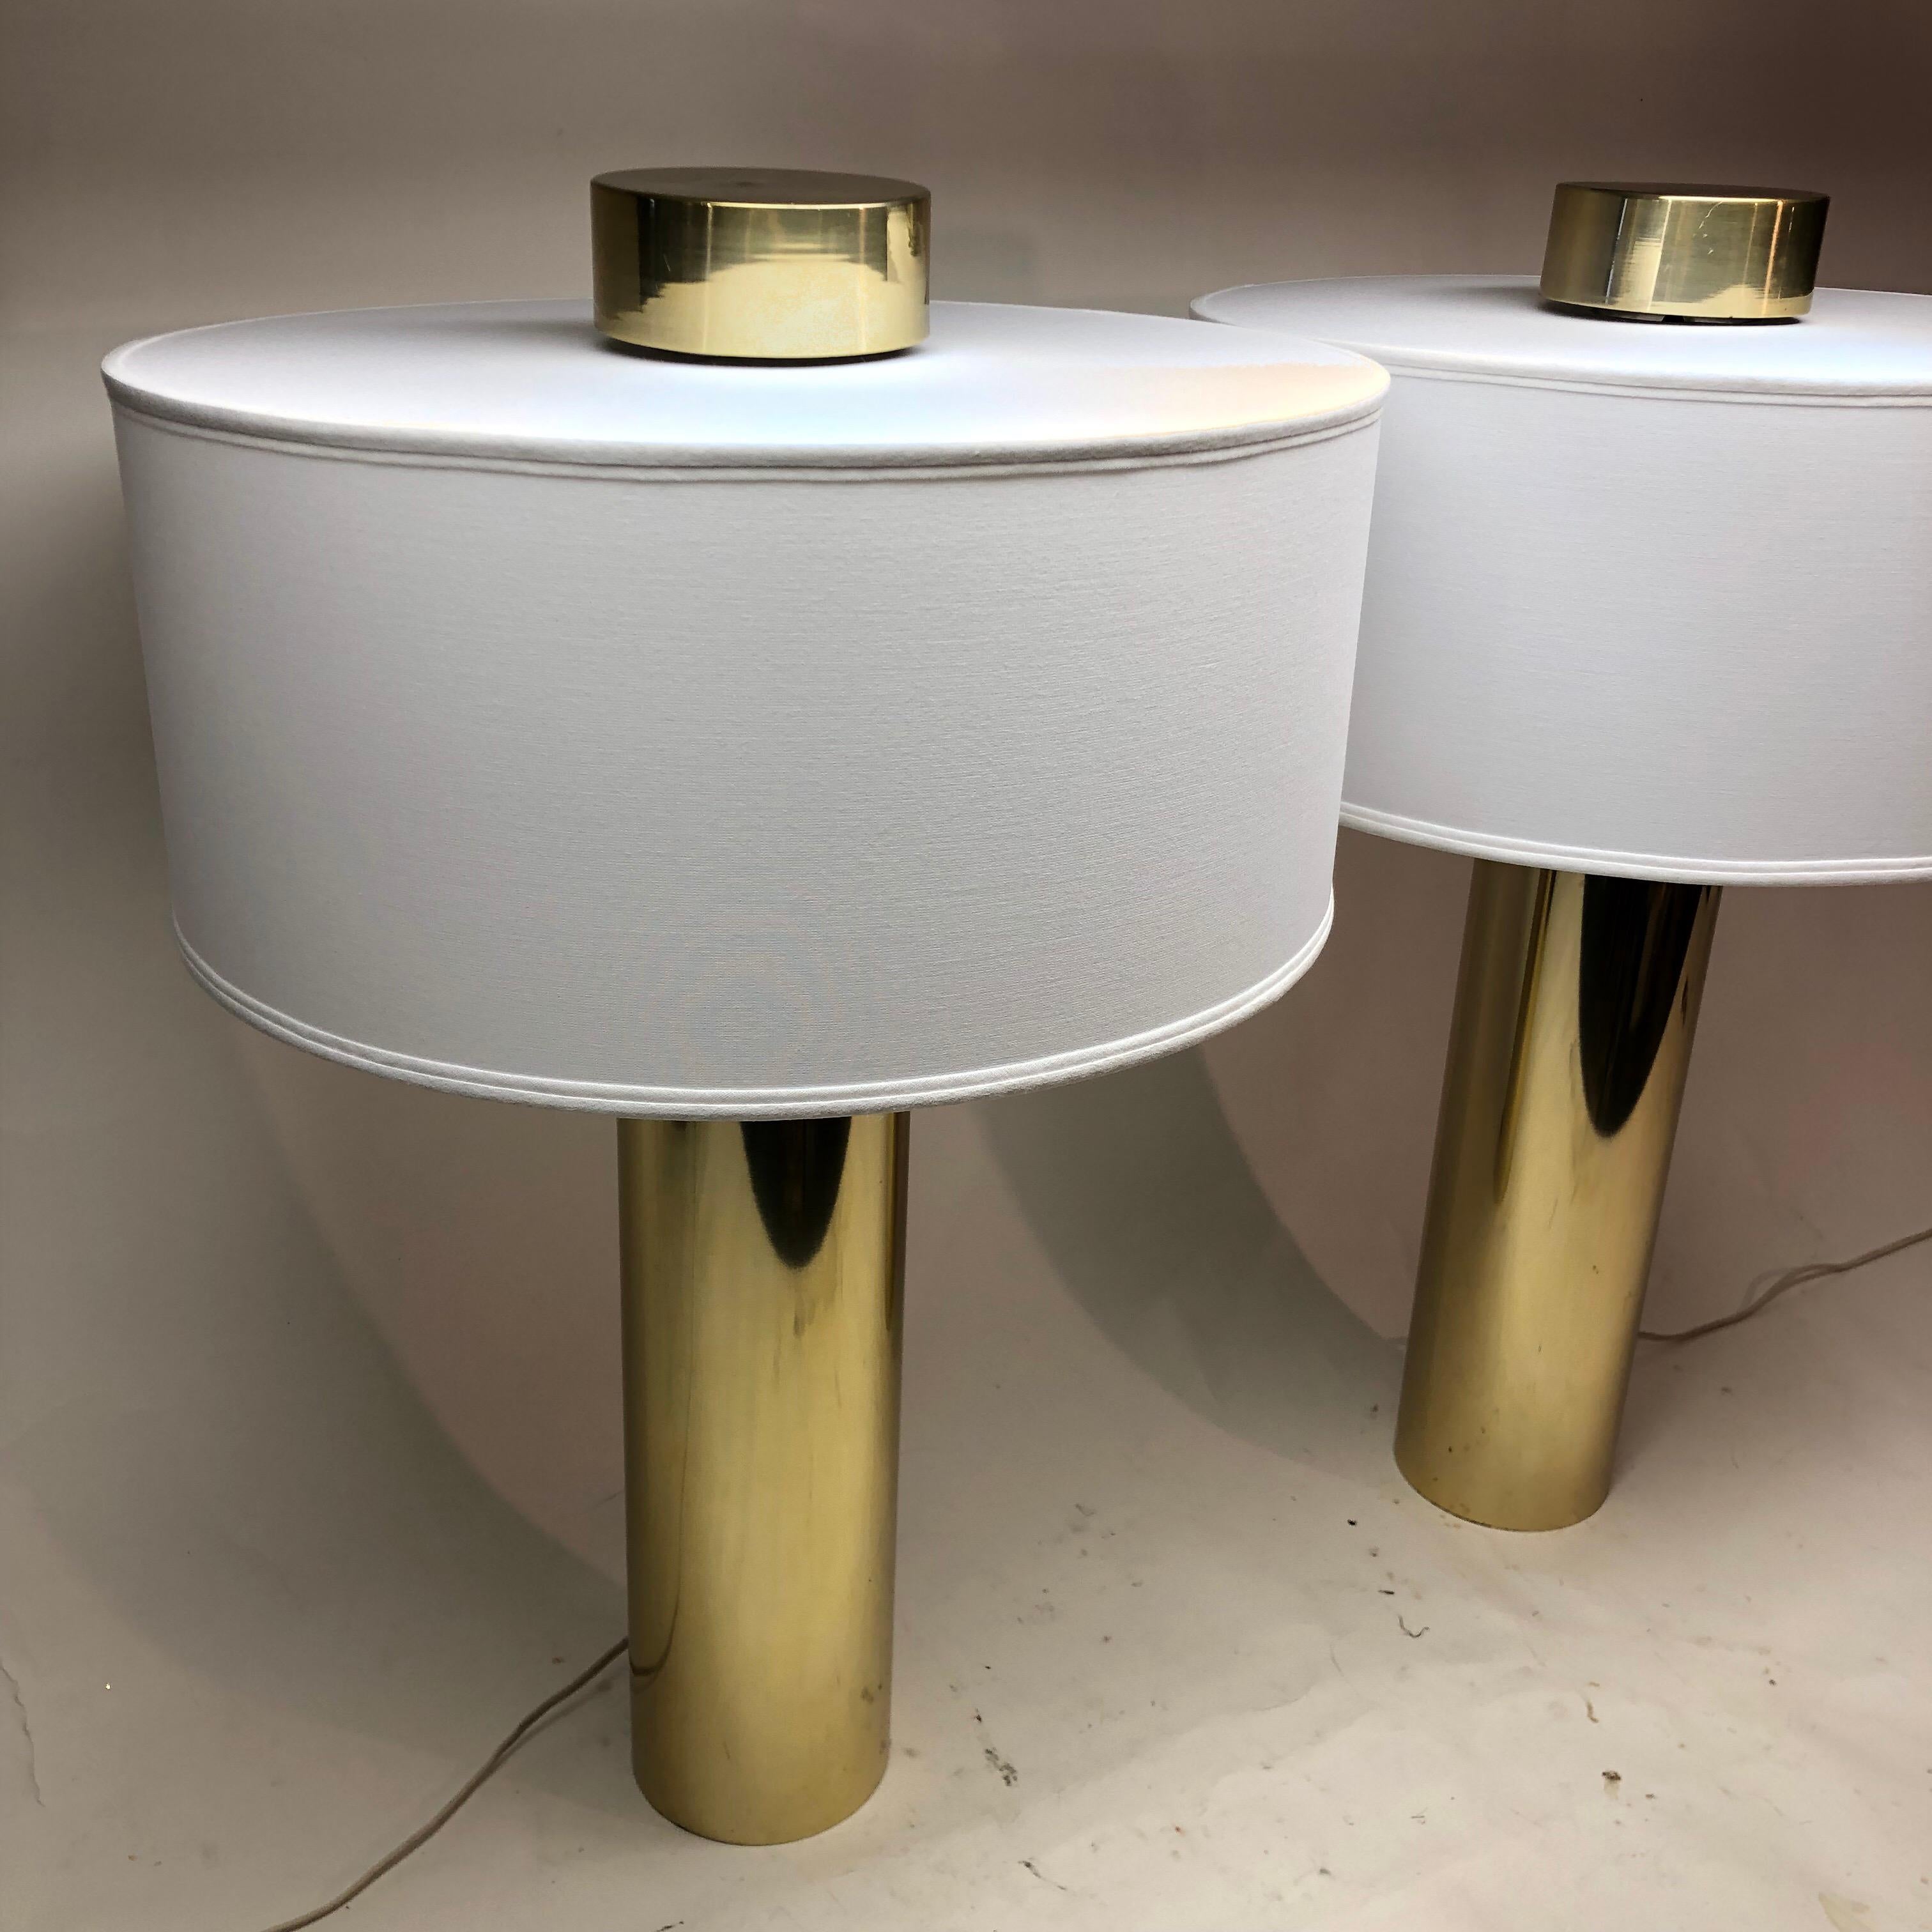 Pair of touch activated brass cylinder table lamps with custom linen lamp shades. Three way light...

Base measures 4.75